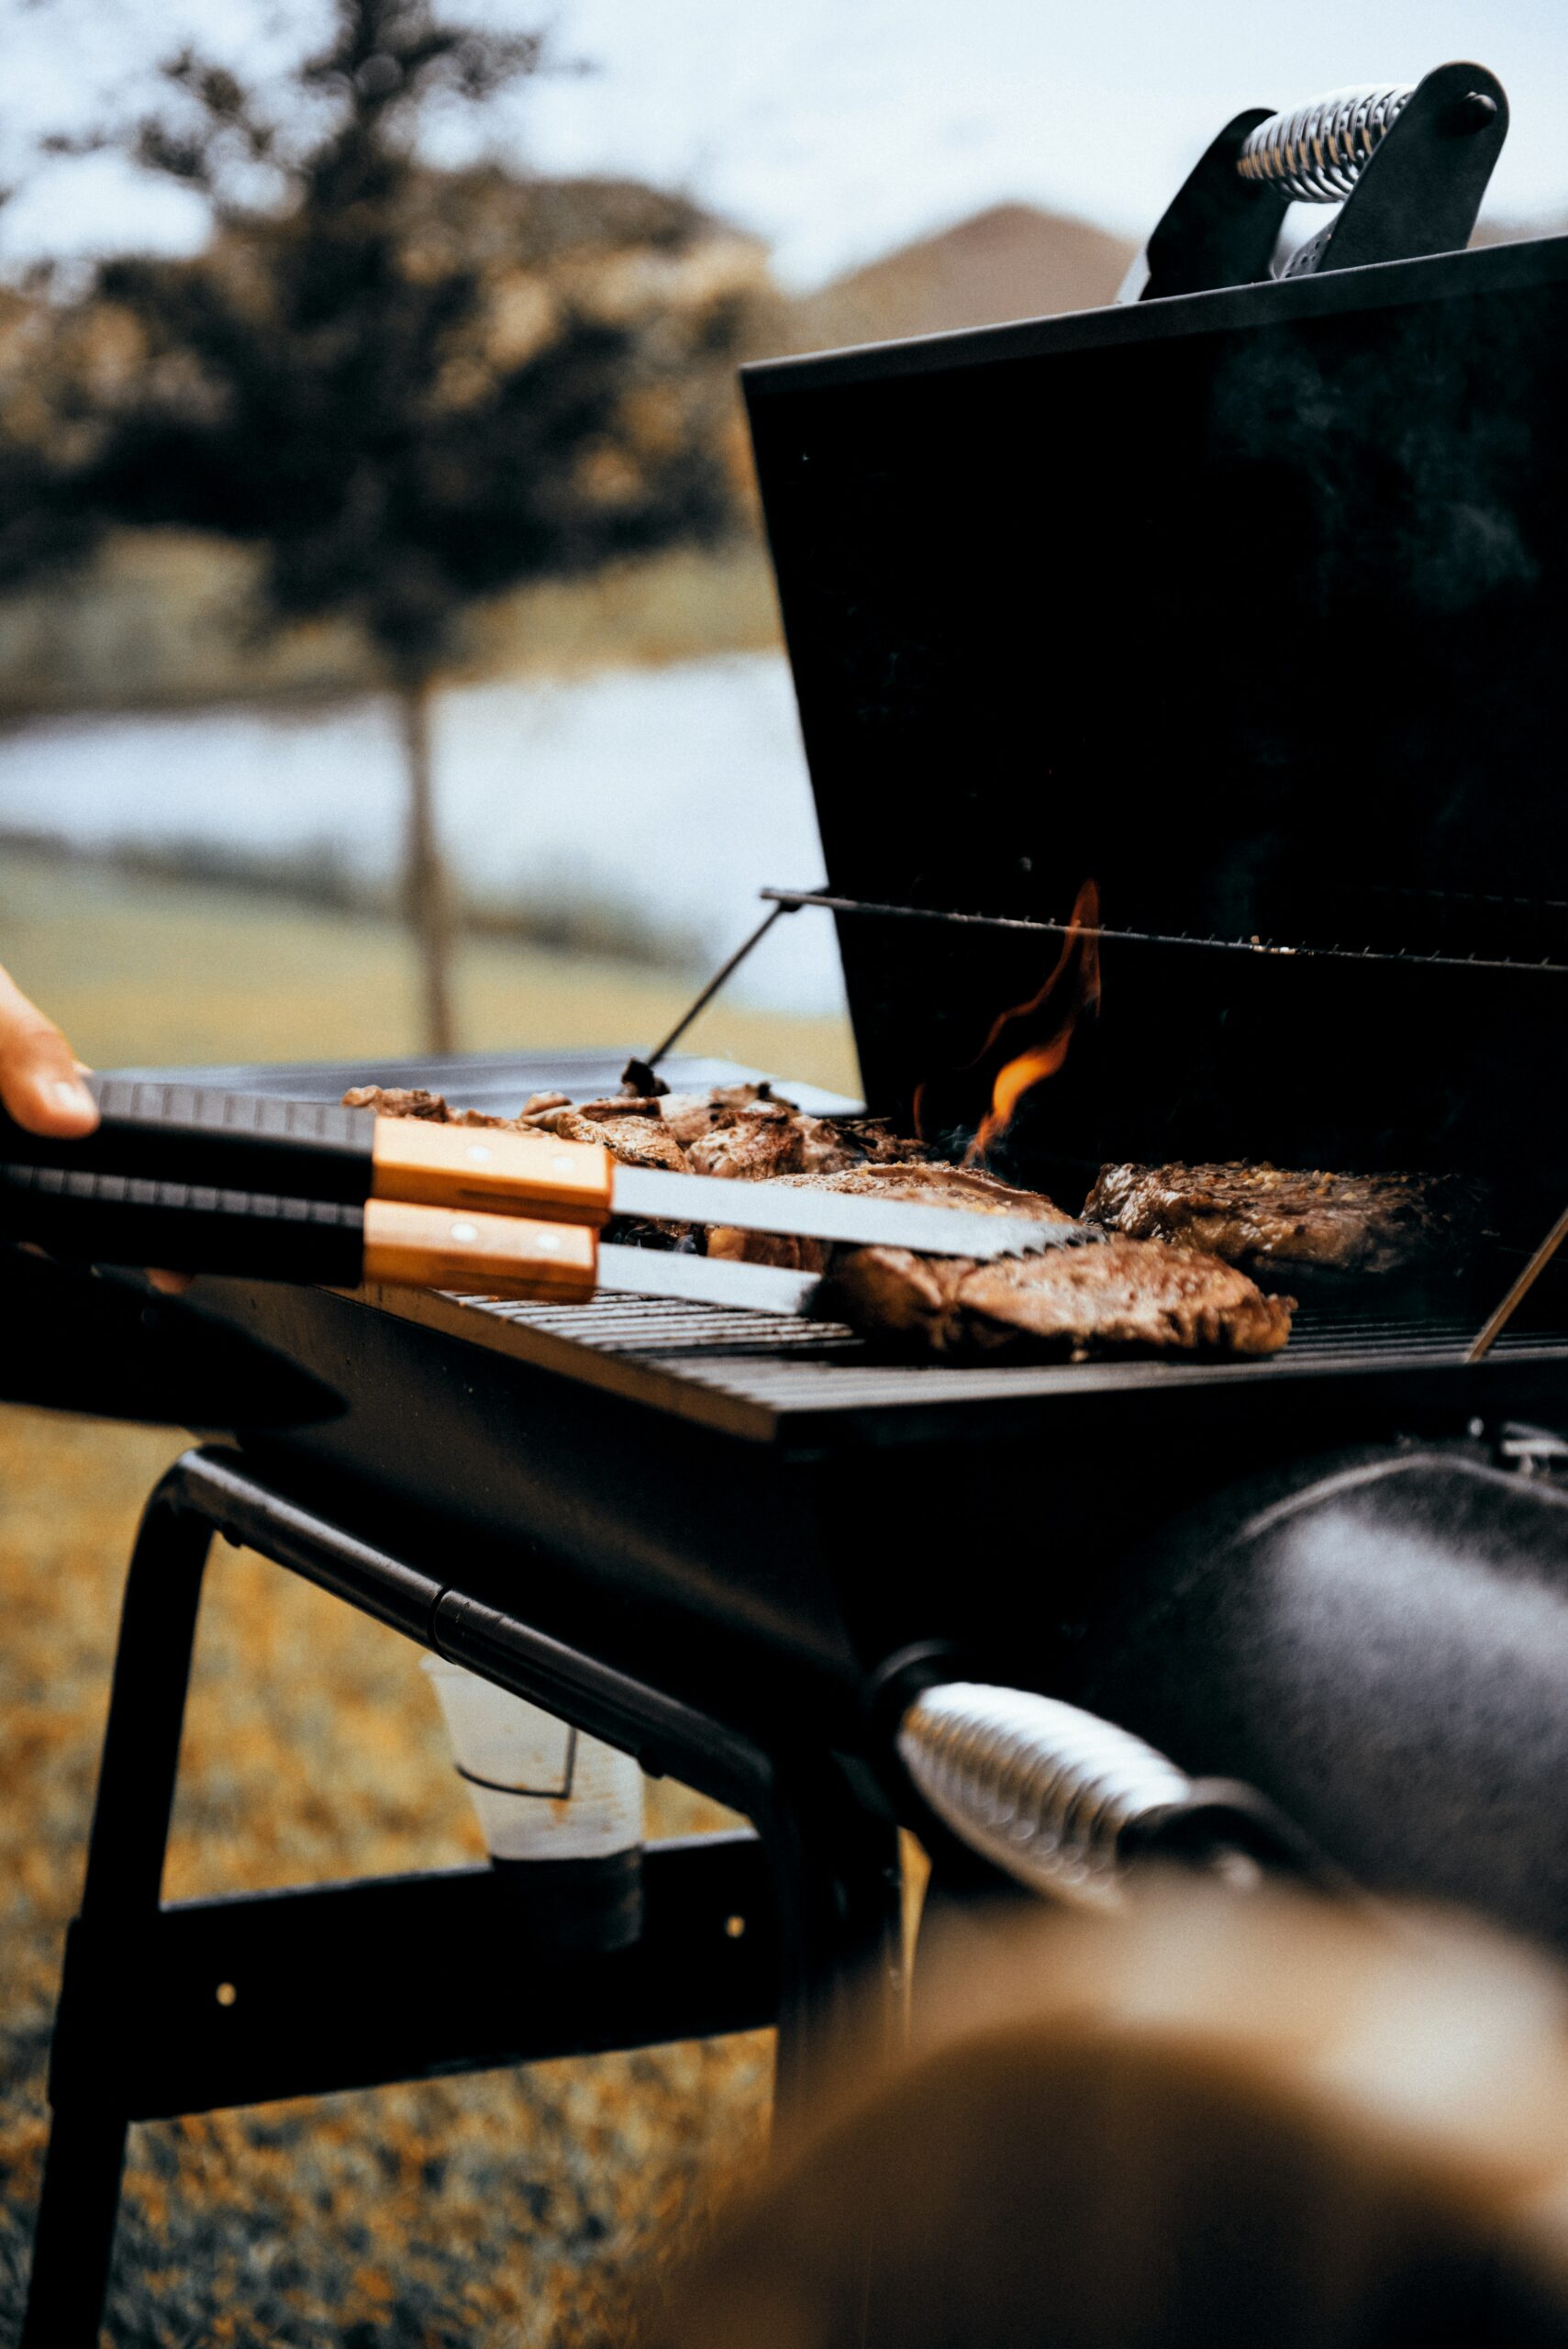 What Is The Southern Approach To Barbecue?